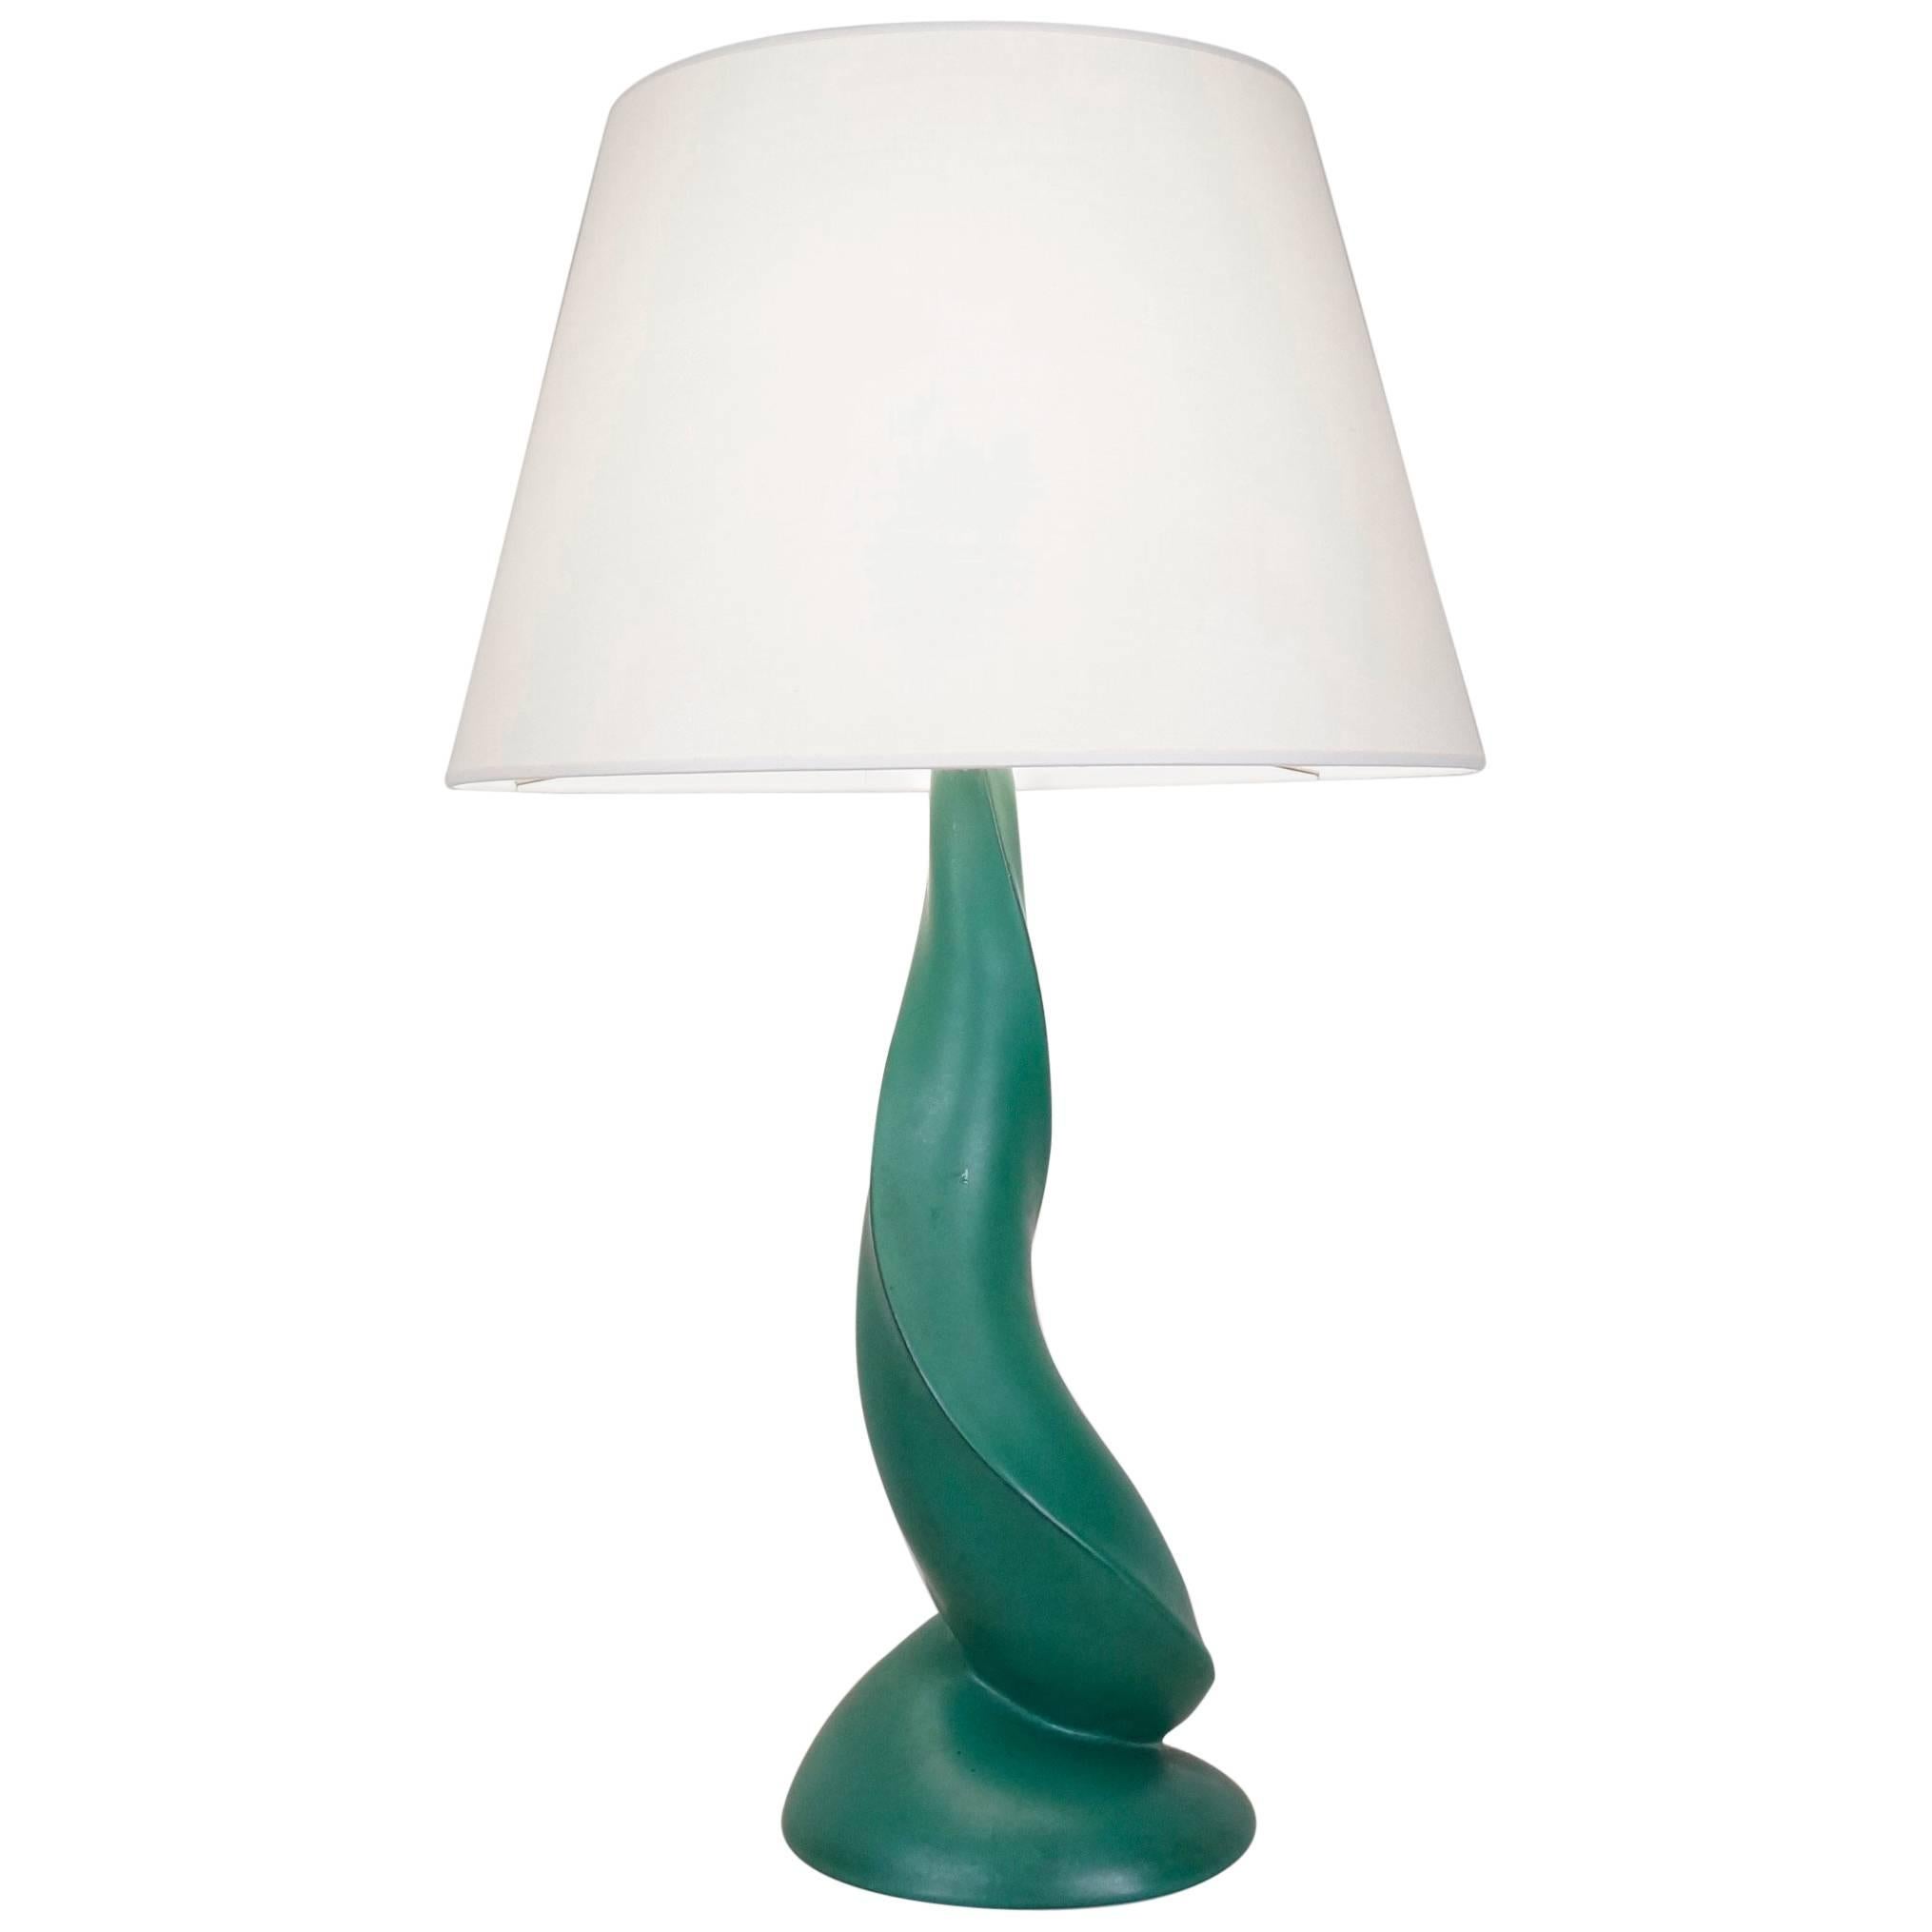 Late 20th Century Green Ceramic Table Lamp by F Cova